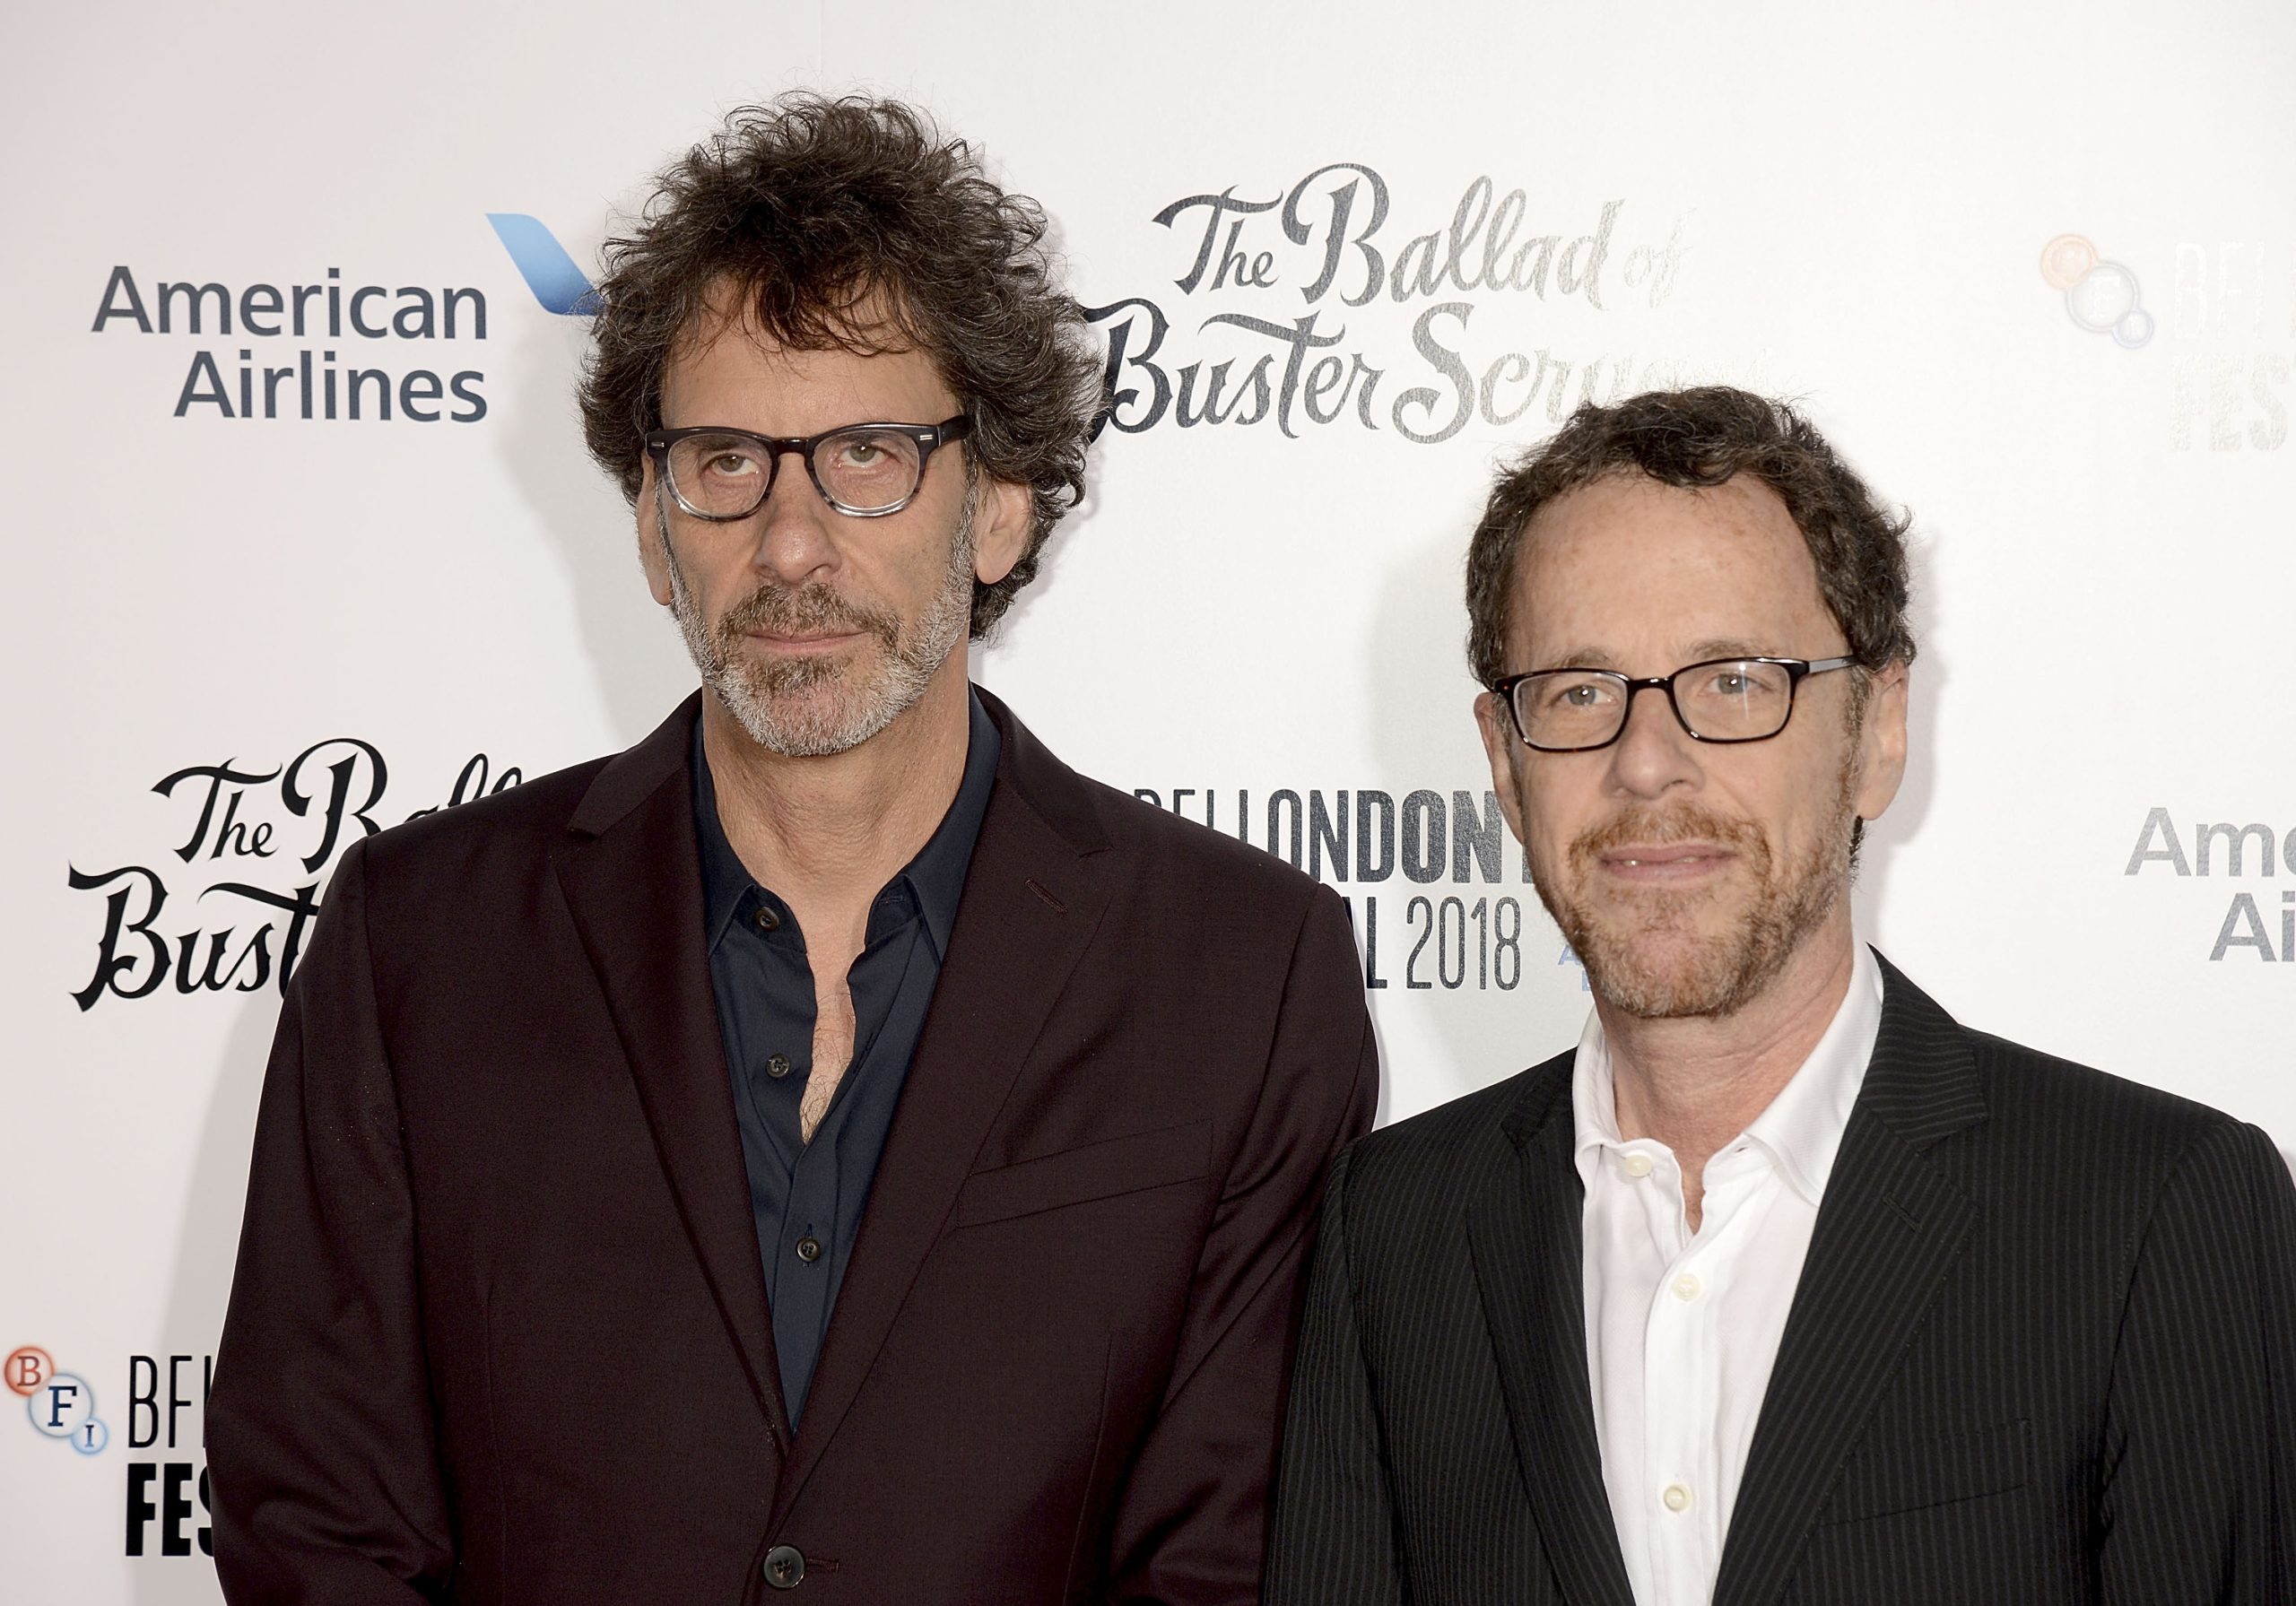 Ethan Coen Teases Potential Coen Brothers Reunion: We’re ‘Working on Writing Something’ Together